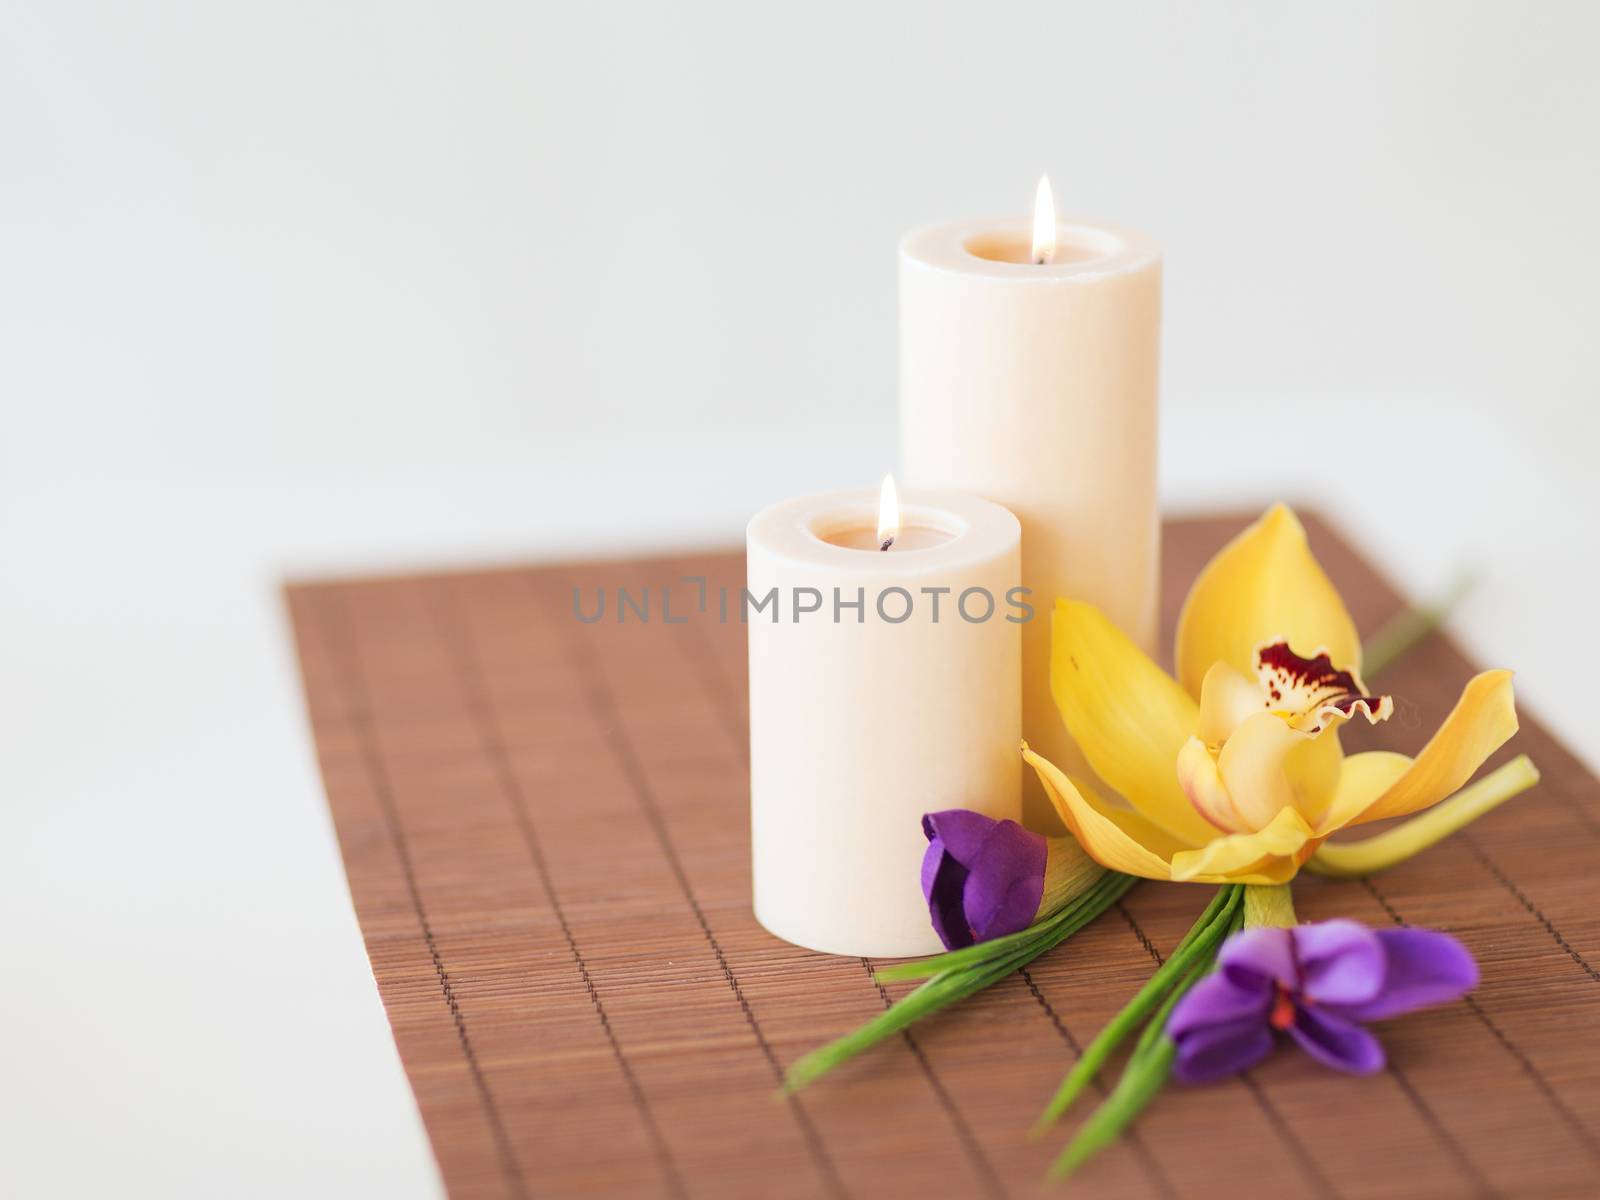 candles, orchid and iris flowers on bamboo mat by dolgachov